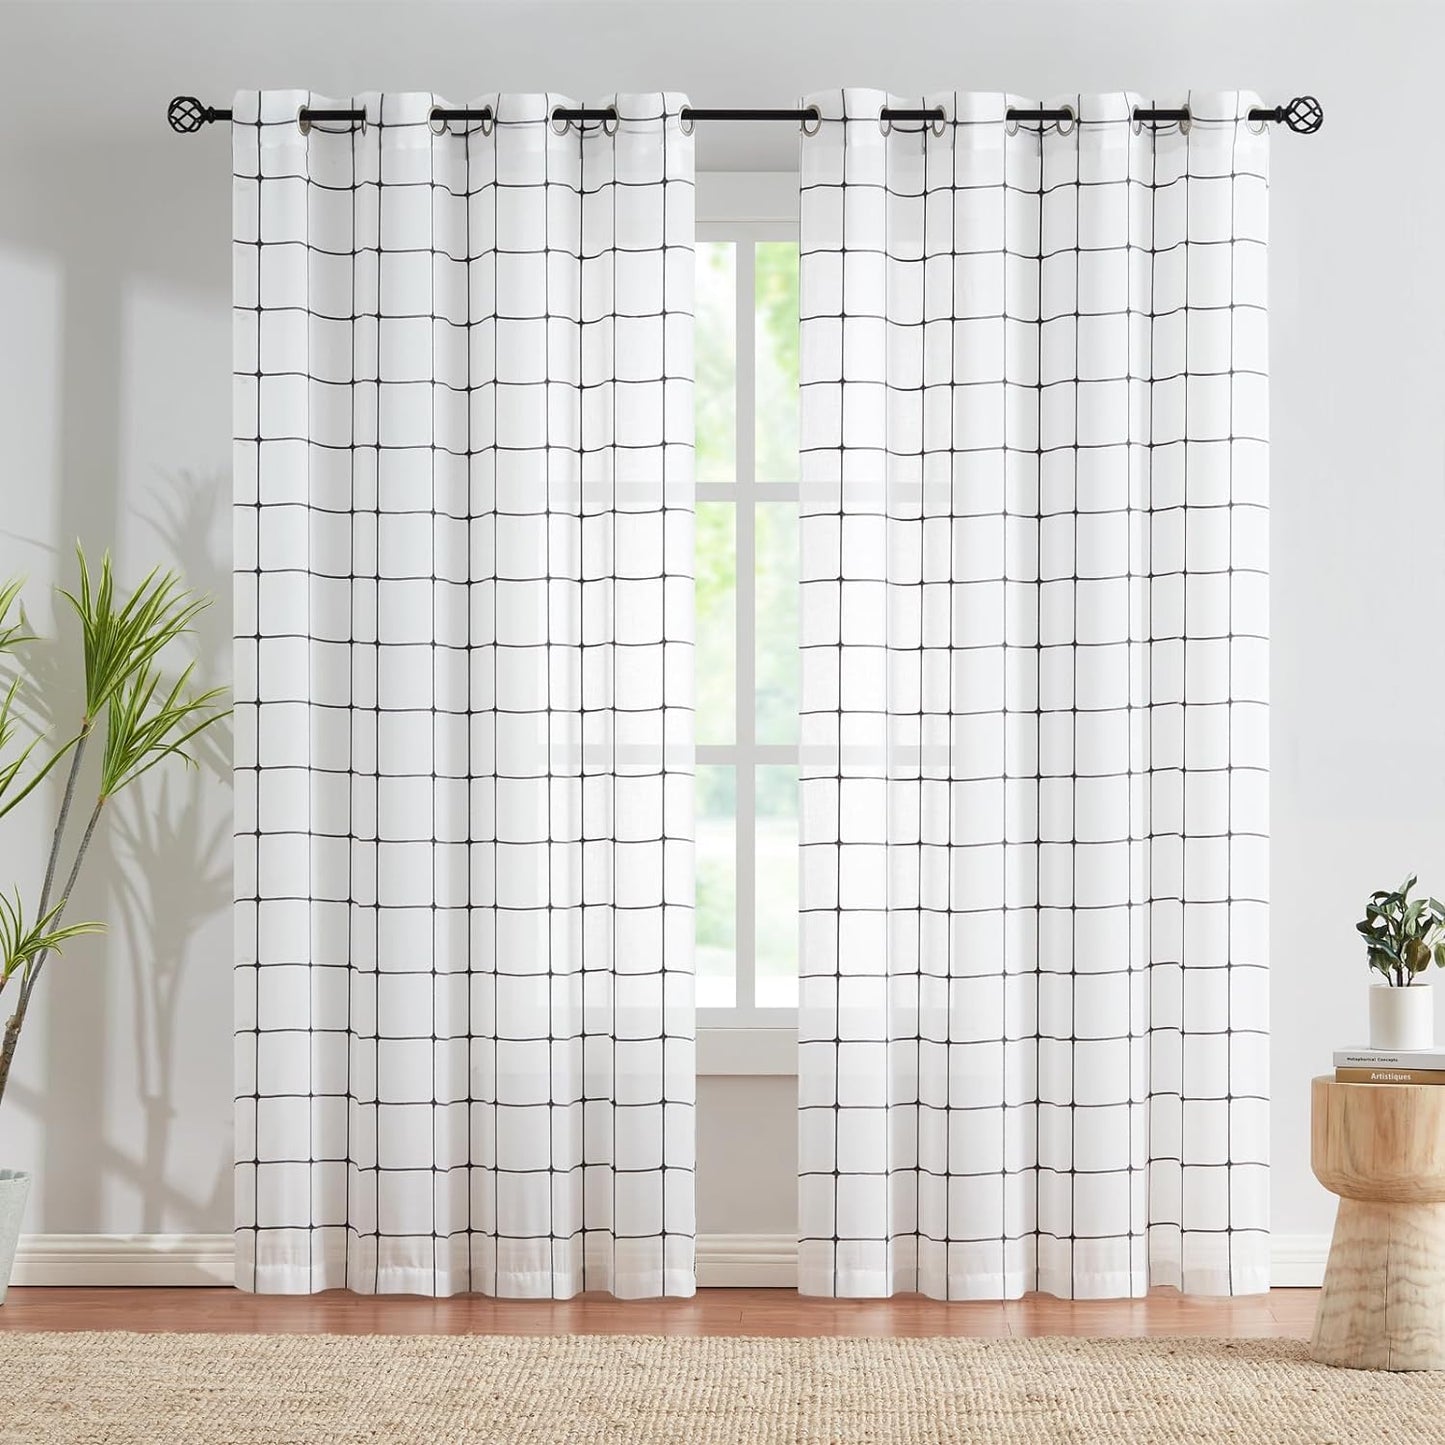 Treatmentex Buffalo Check Curtains 84Inch Farmhouse Pom Pom Drapes for Living Room Vintage Gingham Plaid Semi Sheer Tan Window Curtains for Bedroom Kitchen 2 Panels Rod Pocket Taupe and White  Natural Decoratex Sheer Charcoal Grey 52"W X 95"L 